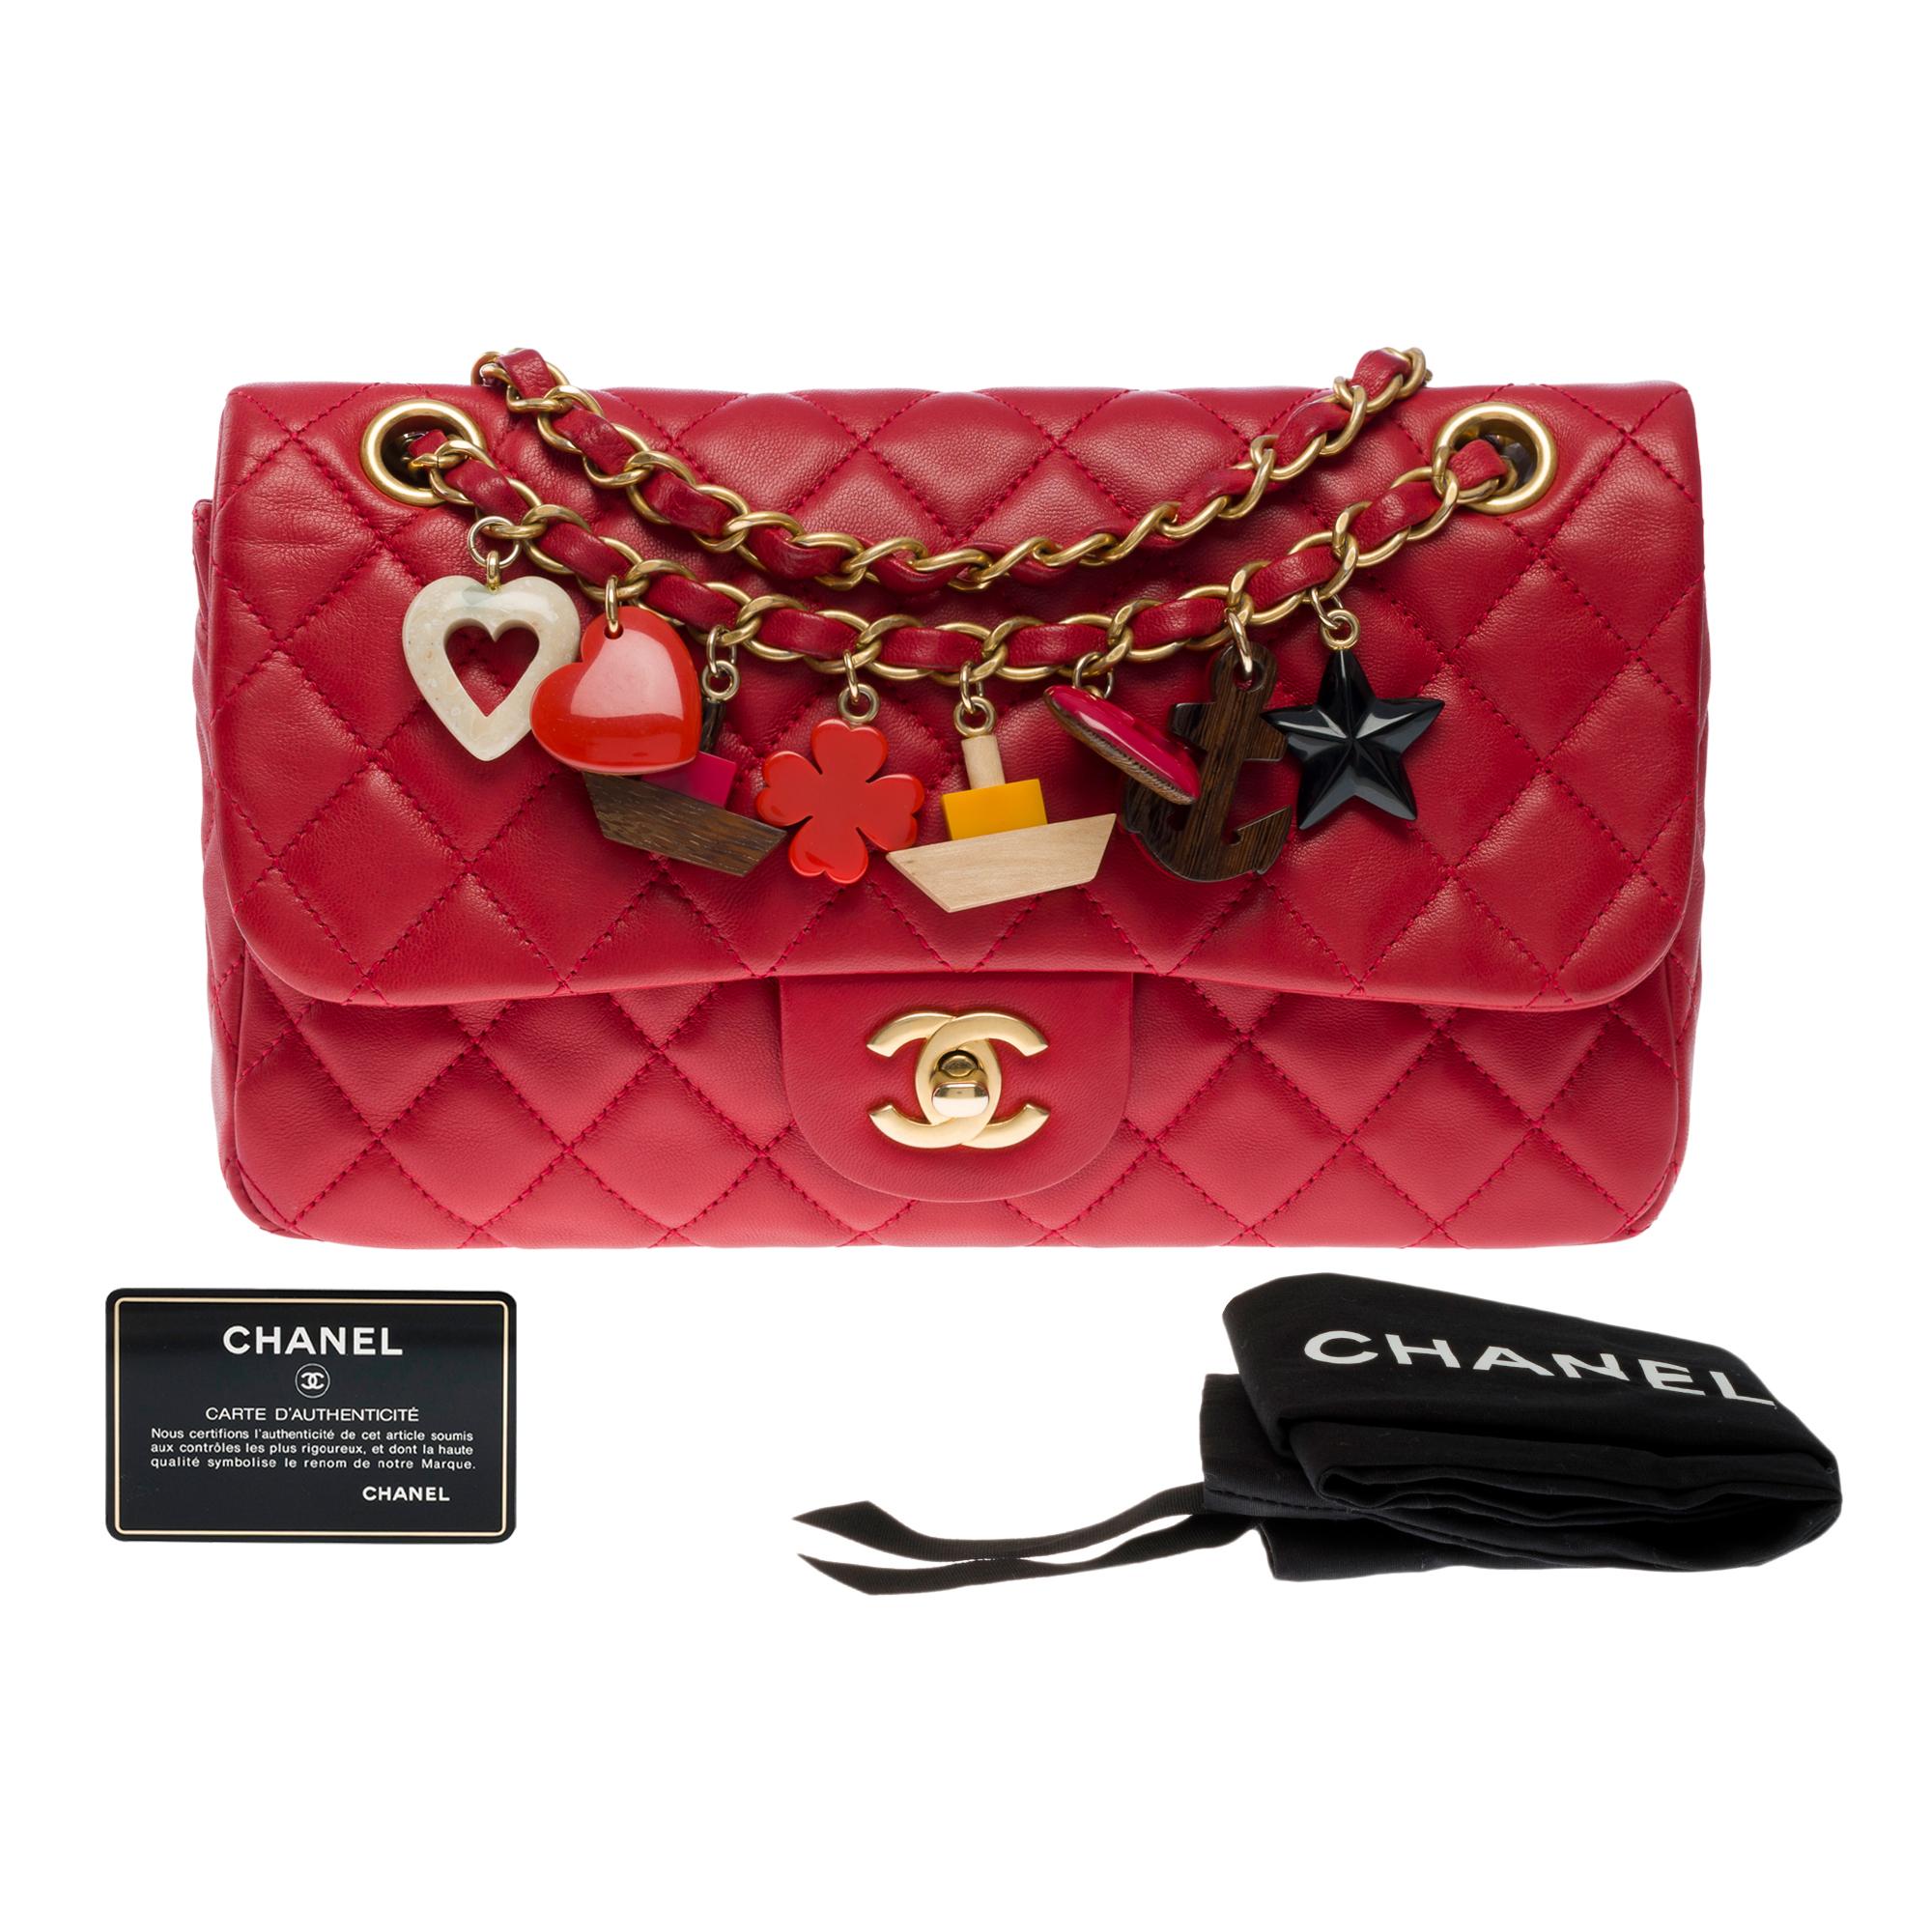 Gorgeous Chanel limited edition 